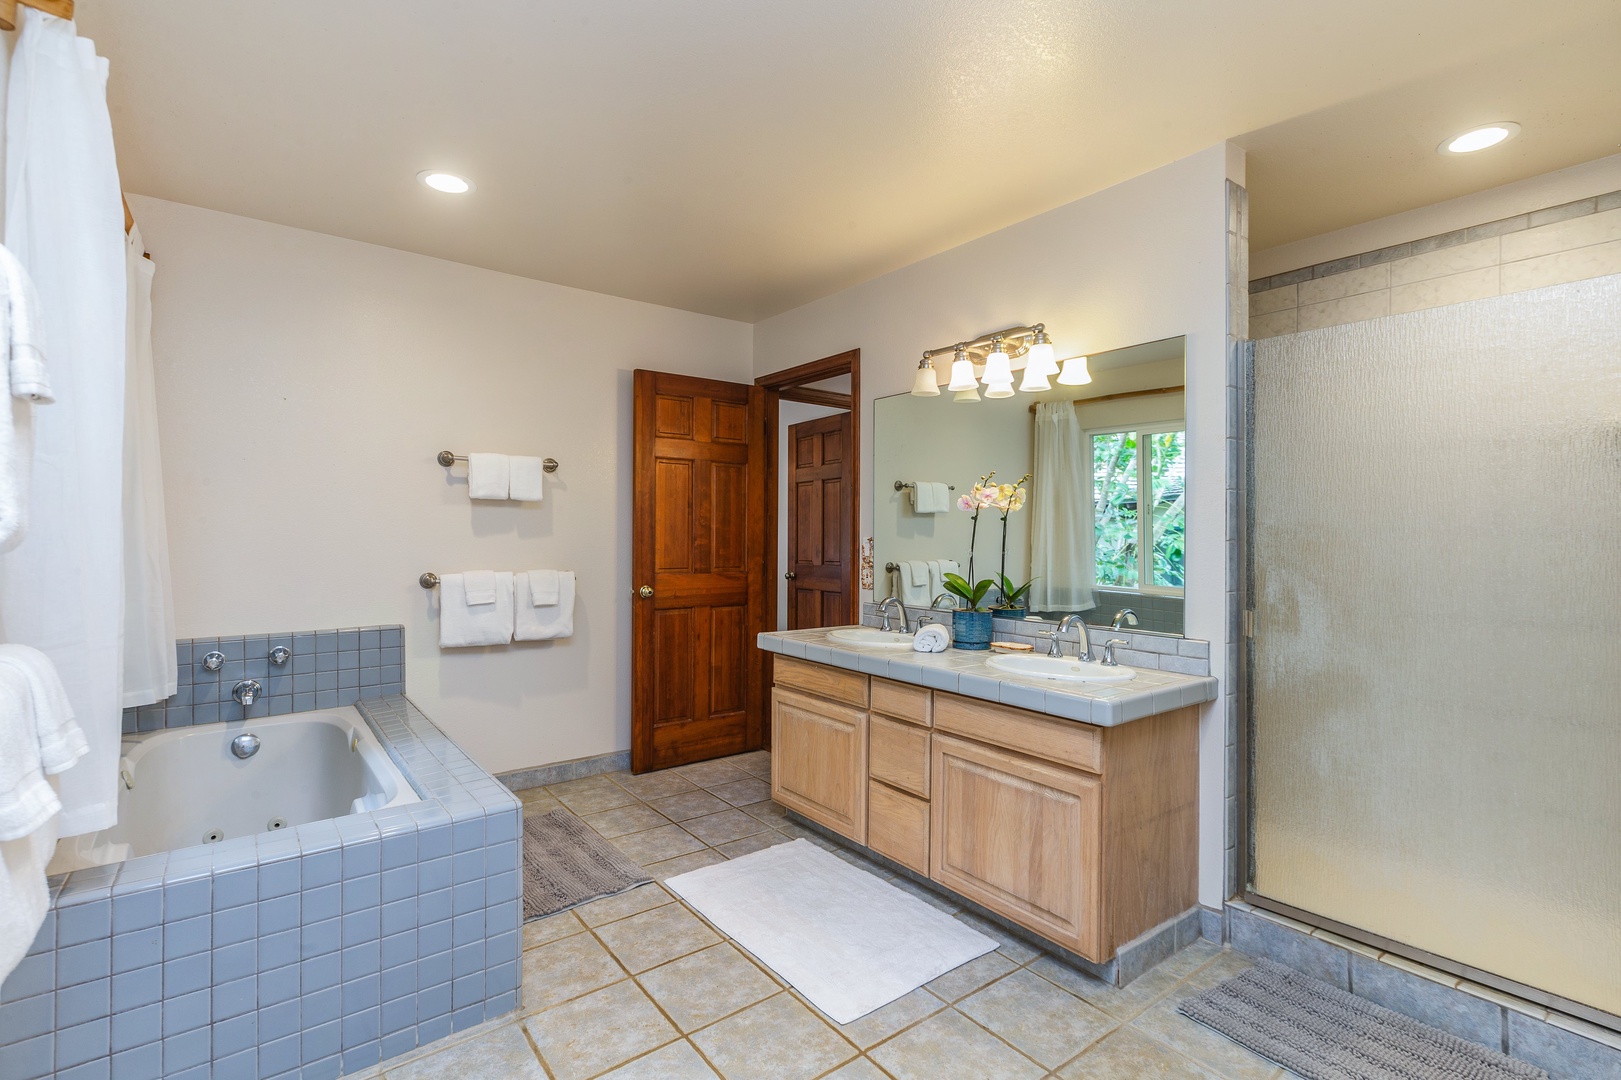 Princeville Vacation Rentals, Hale Ohia - Ensuite has dual sinks and a soaking tub